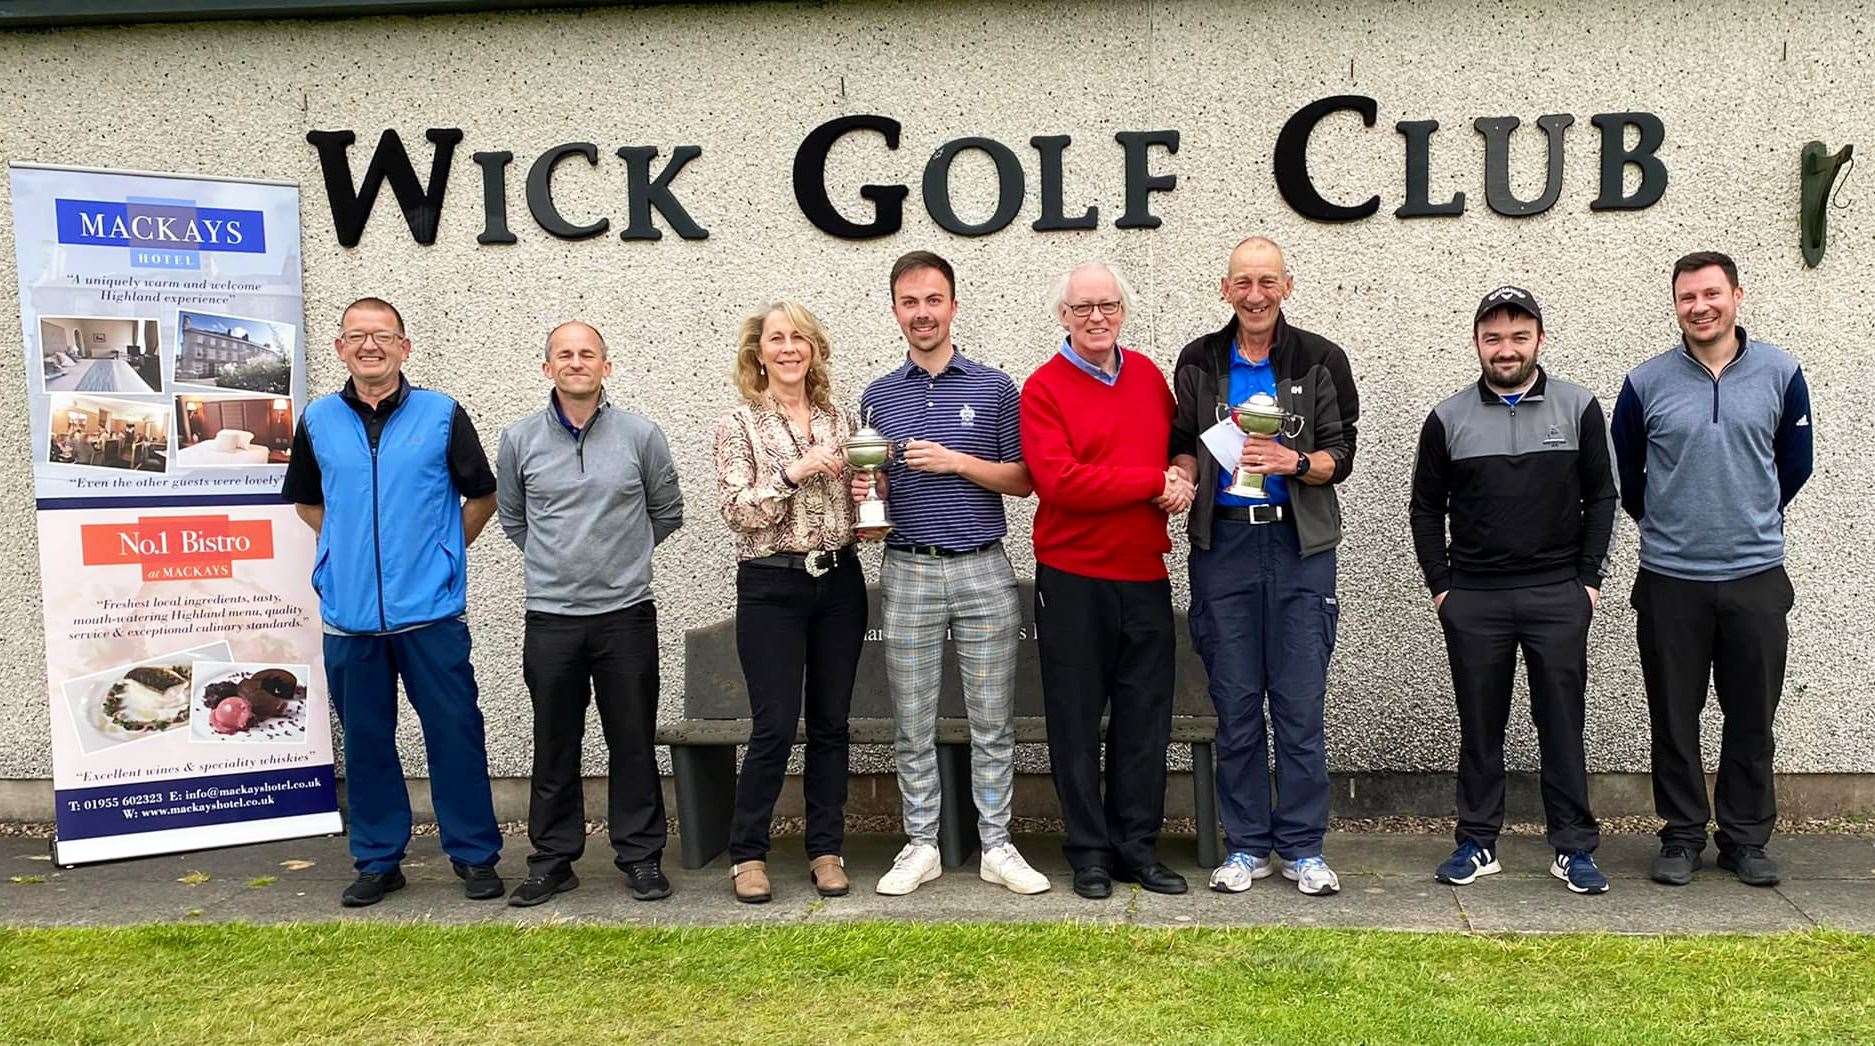 From left: Sanders Harper, Nicky Klimas, Ellie Lamont, Gregor Munro, Murray Lamont, David Brims, Stuart Steven and Michael Smith after the 36-hole Donald Lamont Memorial Open at Wick Golf Club.